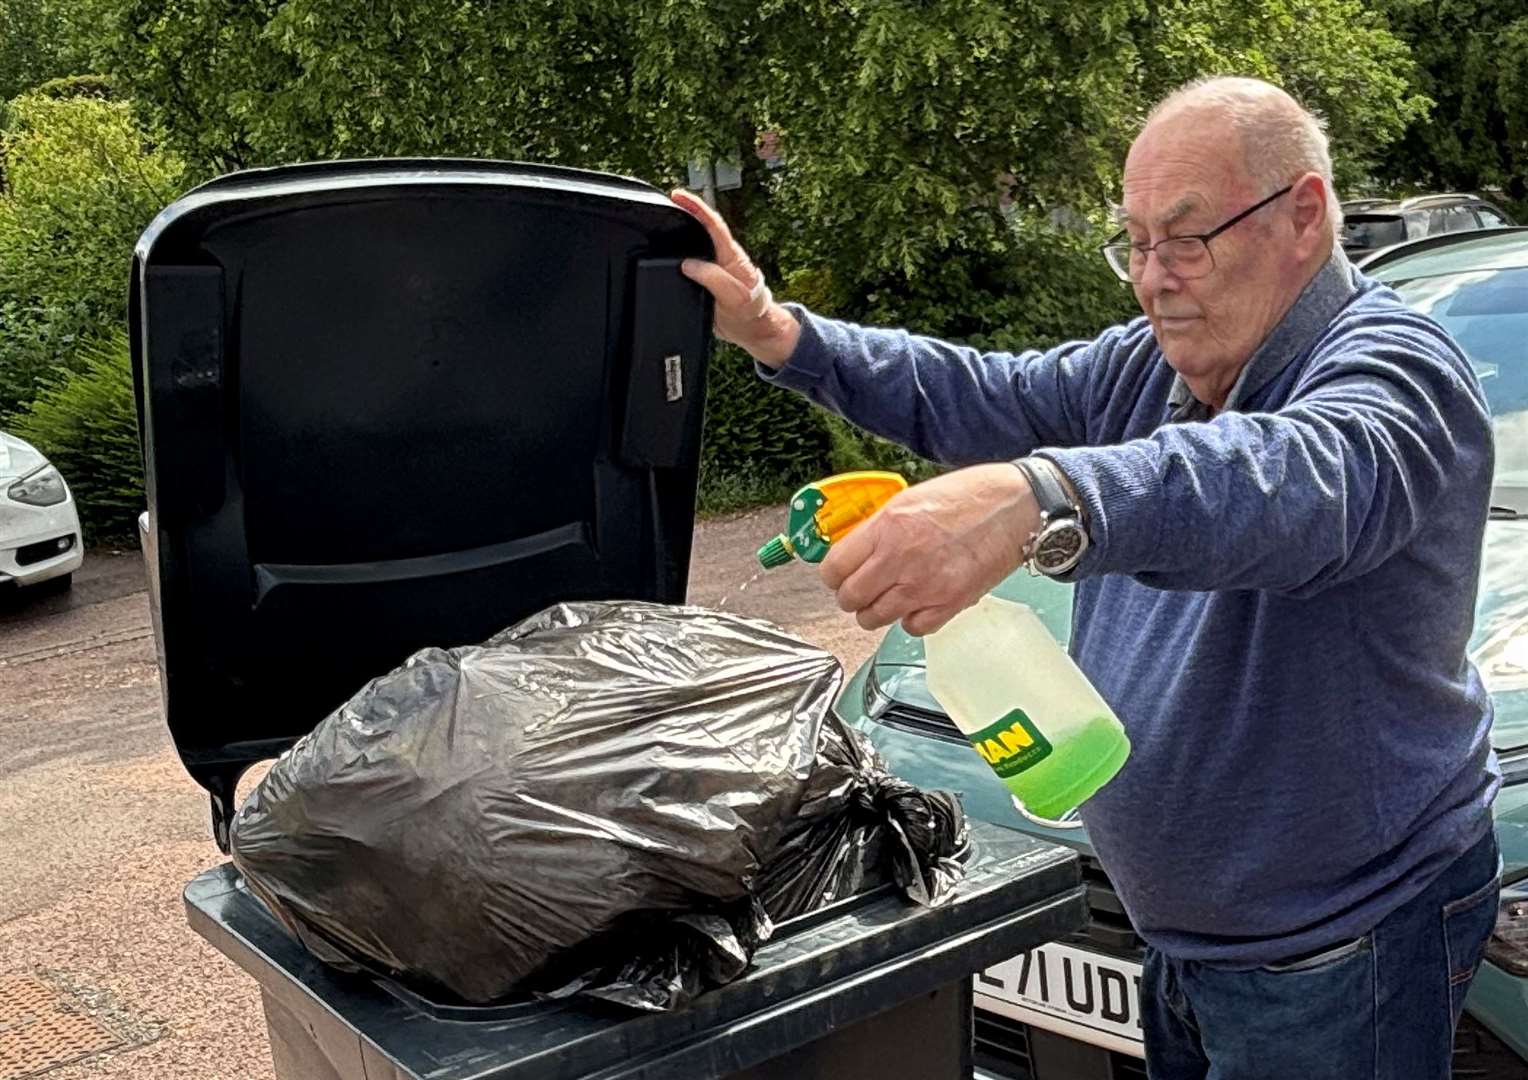 David Cossey, of Willesborough Lees, Ashford, is now spraying his bin with disinfectant every day. Picture: Joe Harbert